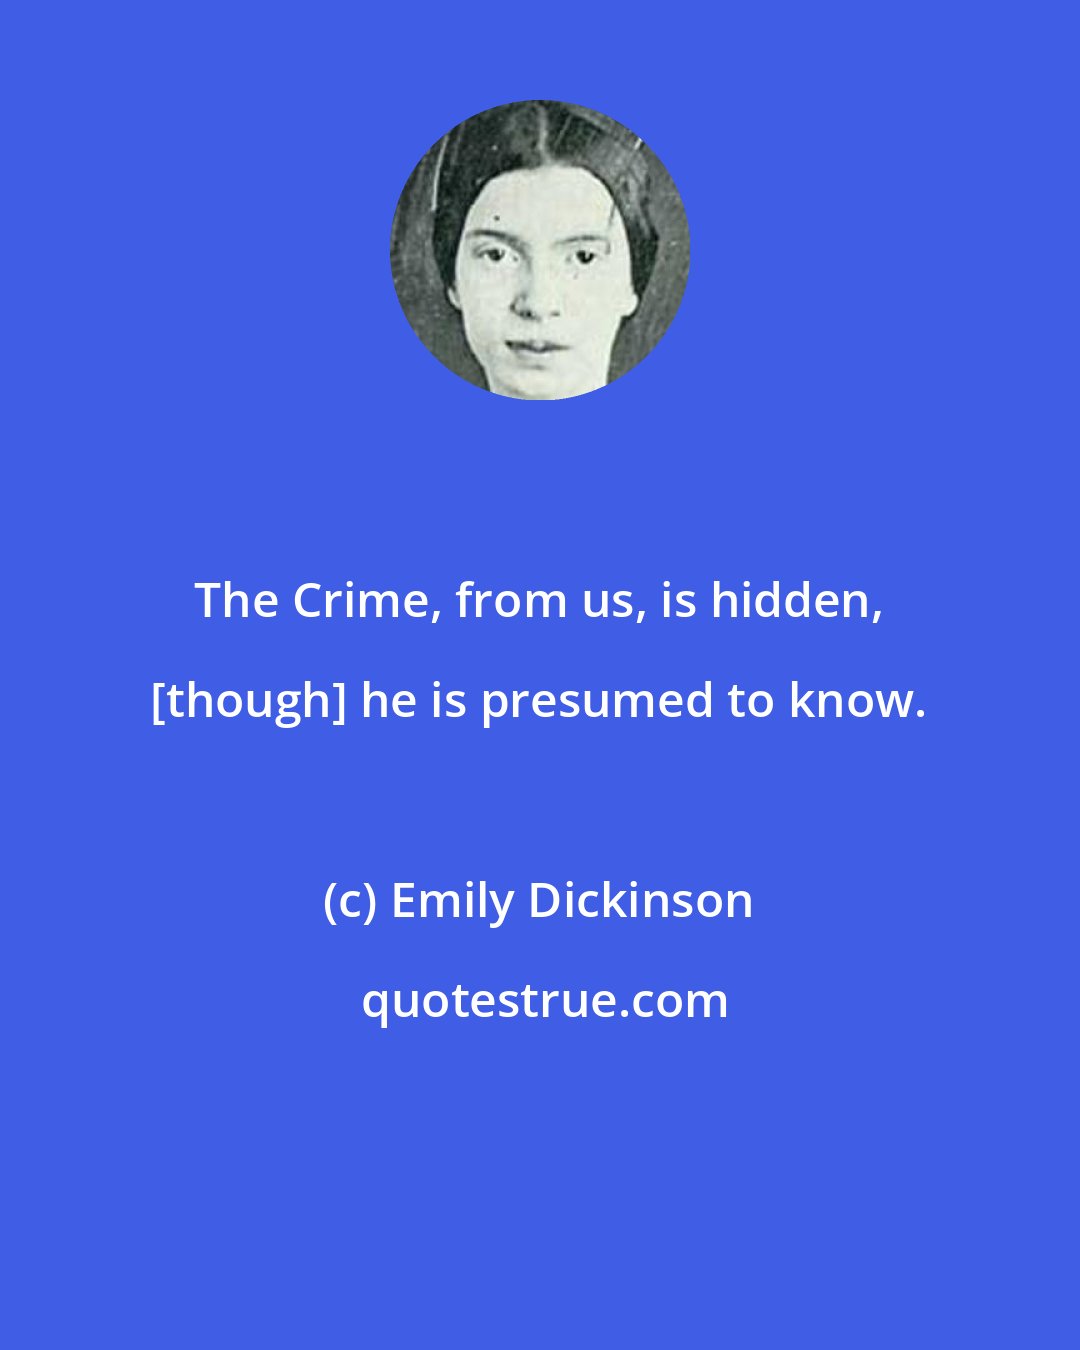 Emily Dickinson: The Crime, from us, is hidden, [though] he is presumed to know.